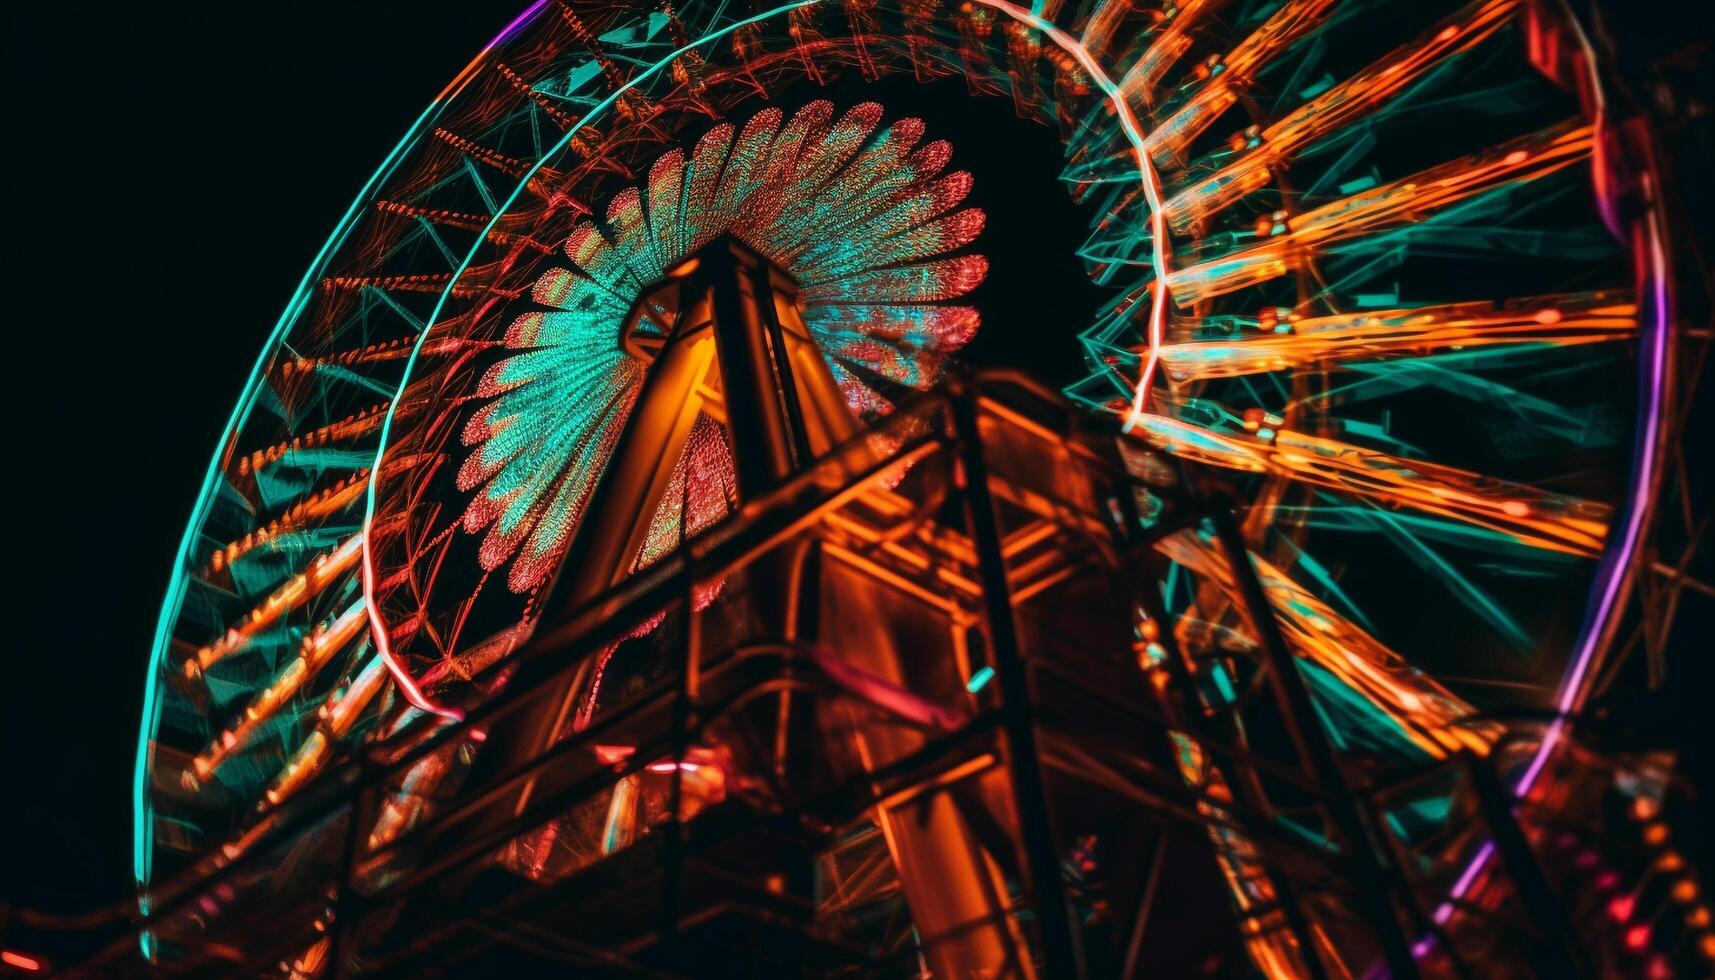 Joyful carnival ride spins in vibrant lights generated by AI photo